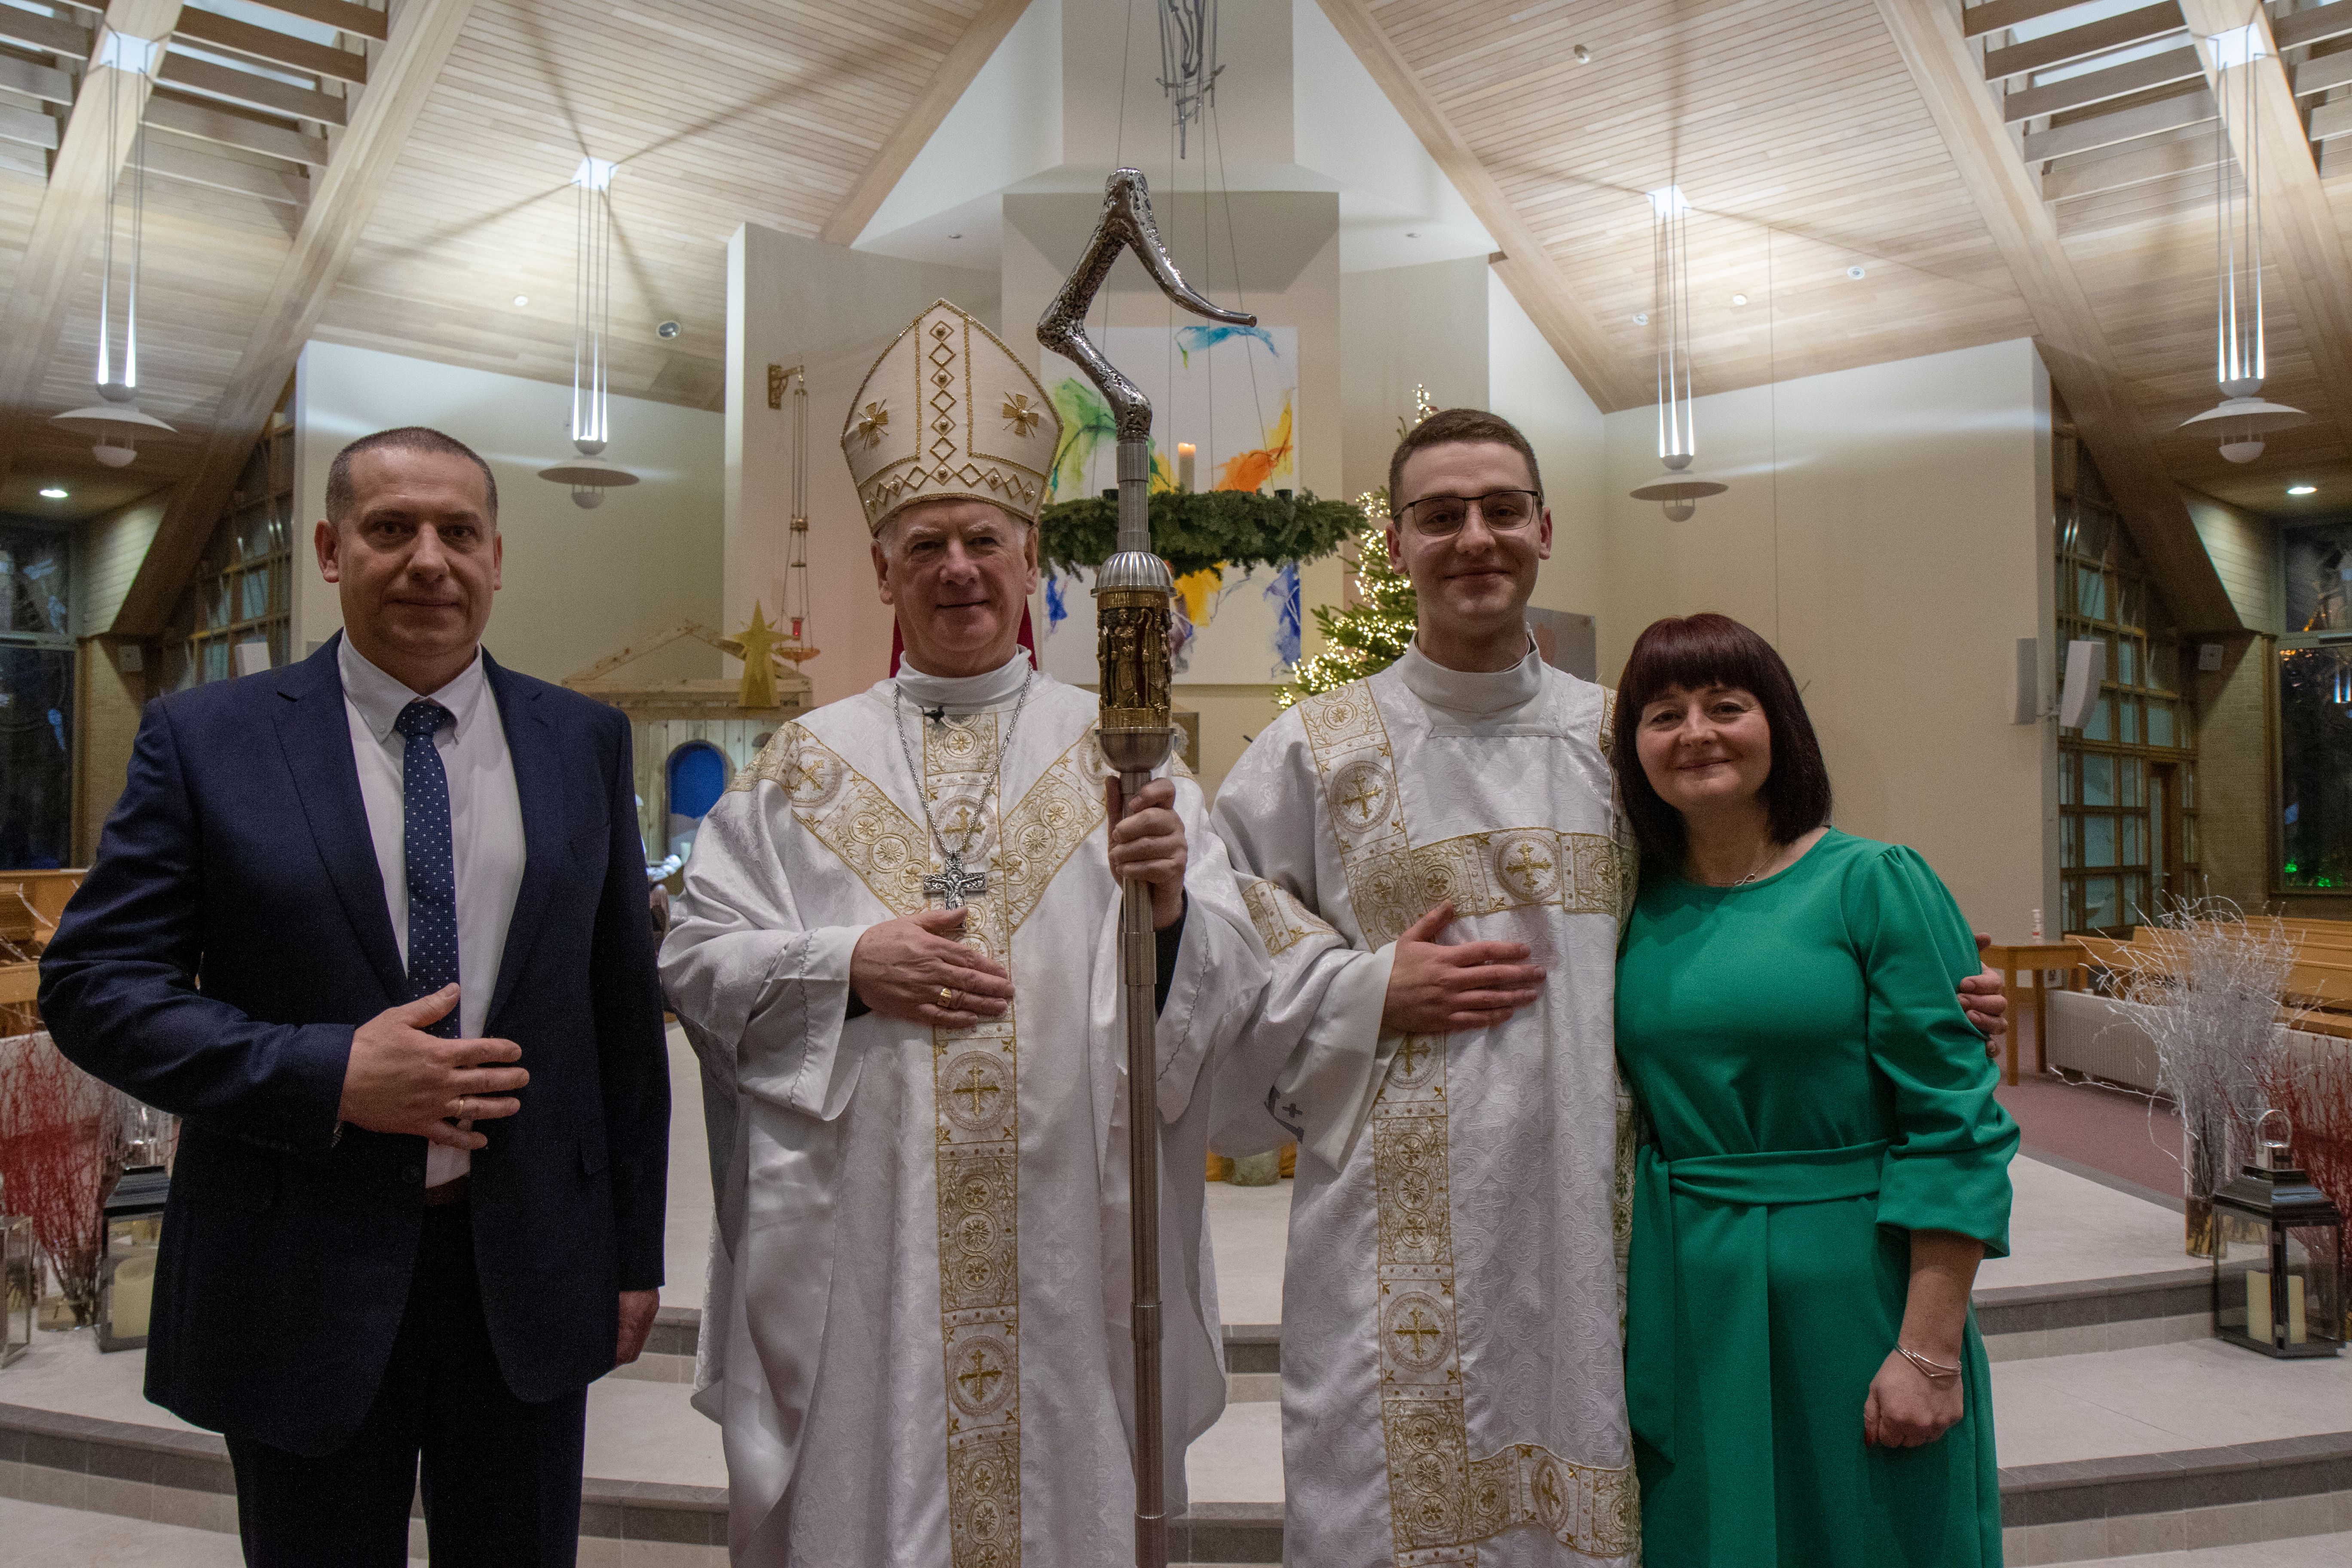 SPECIAL MOMENT: Rev David Aksenczuk with his parents Ola & Jarek and Archbishop Noel Treanor at his Ordination to the Diaconate in The Church of the Immaculate Heart of Mary, Carryduff